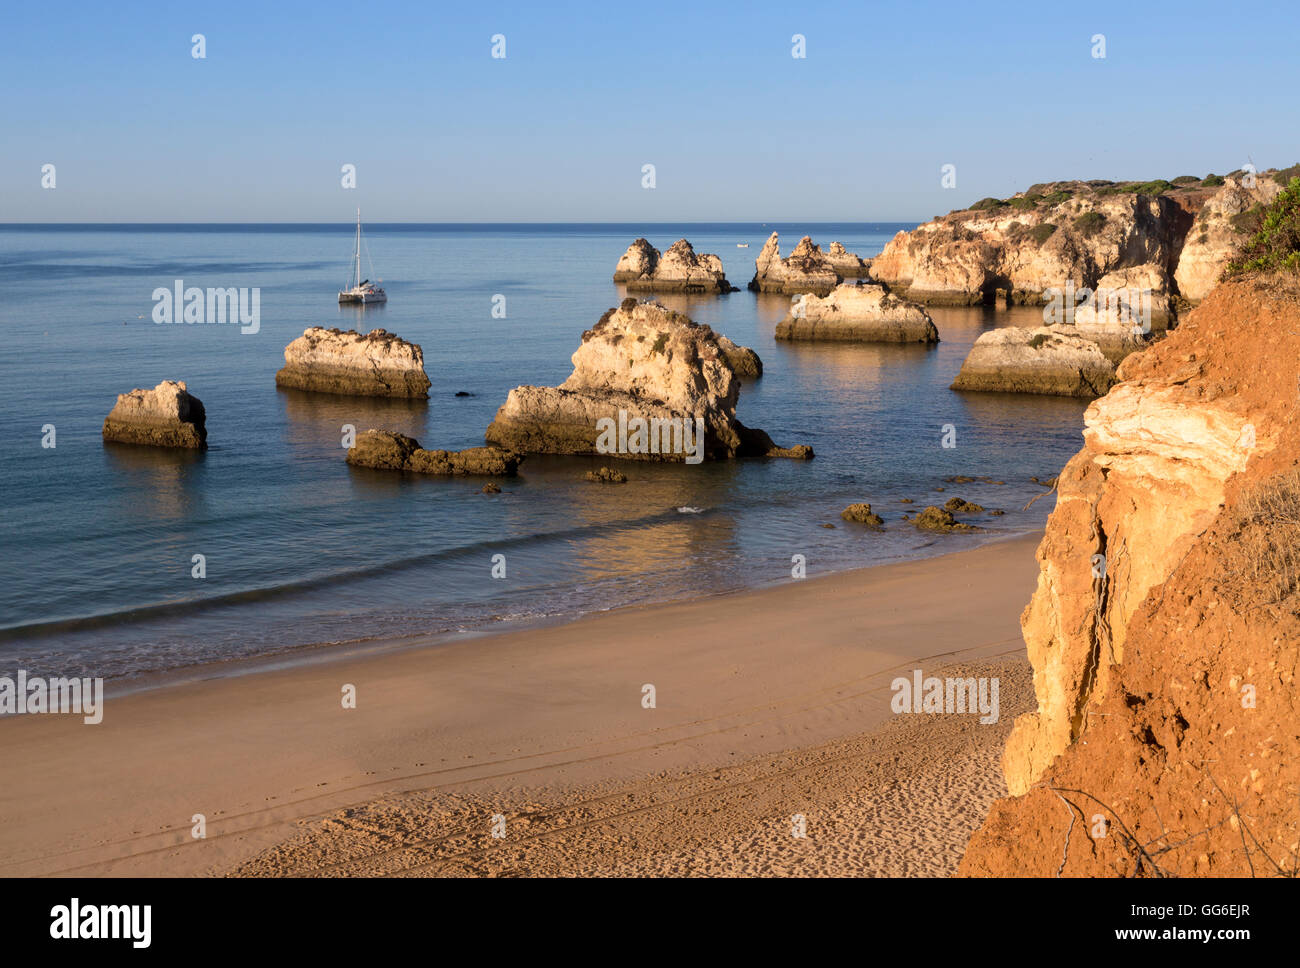 View of the fine sandy beach bathed by the blue ocean at dawn, Praia do Alemao, Portimao, Faro district, Algarve, Portugal Stock Photo